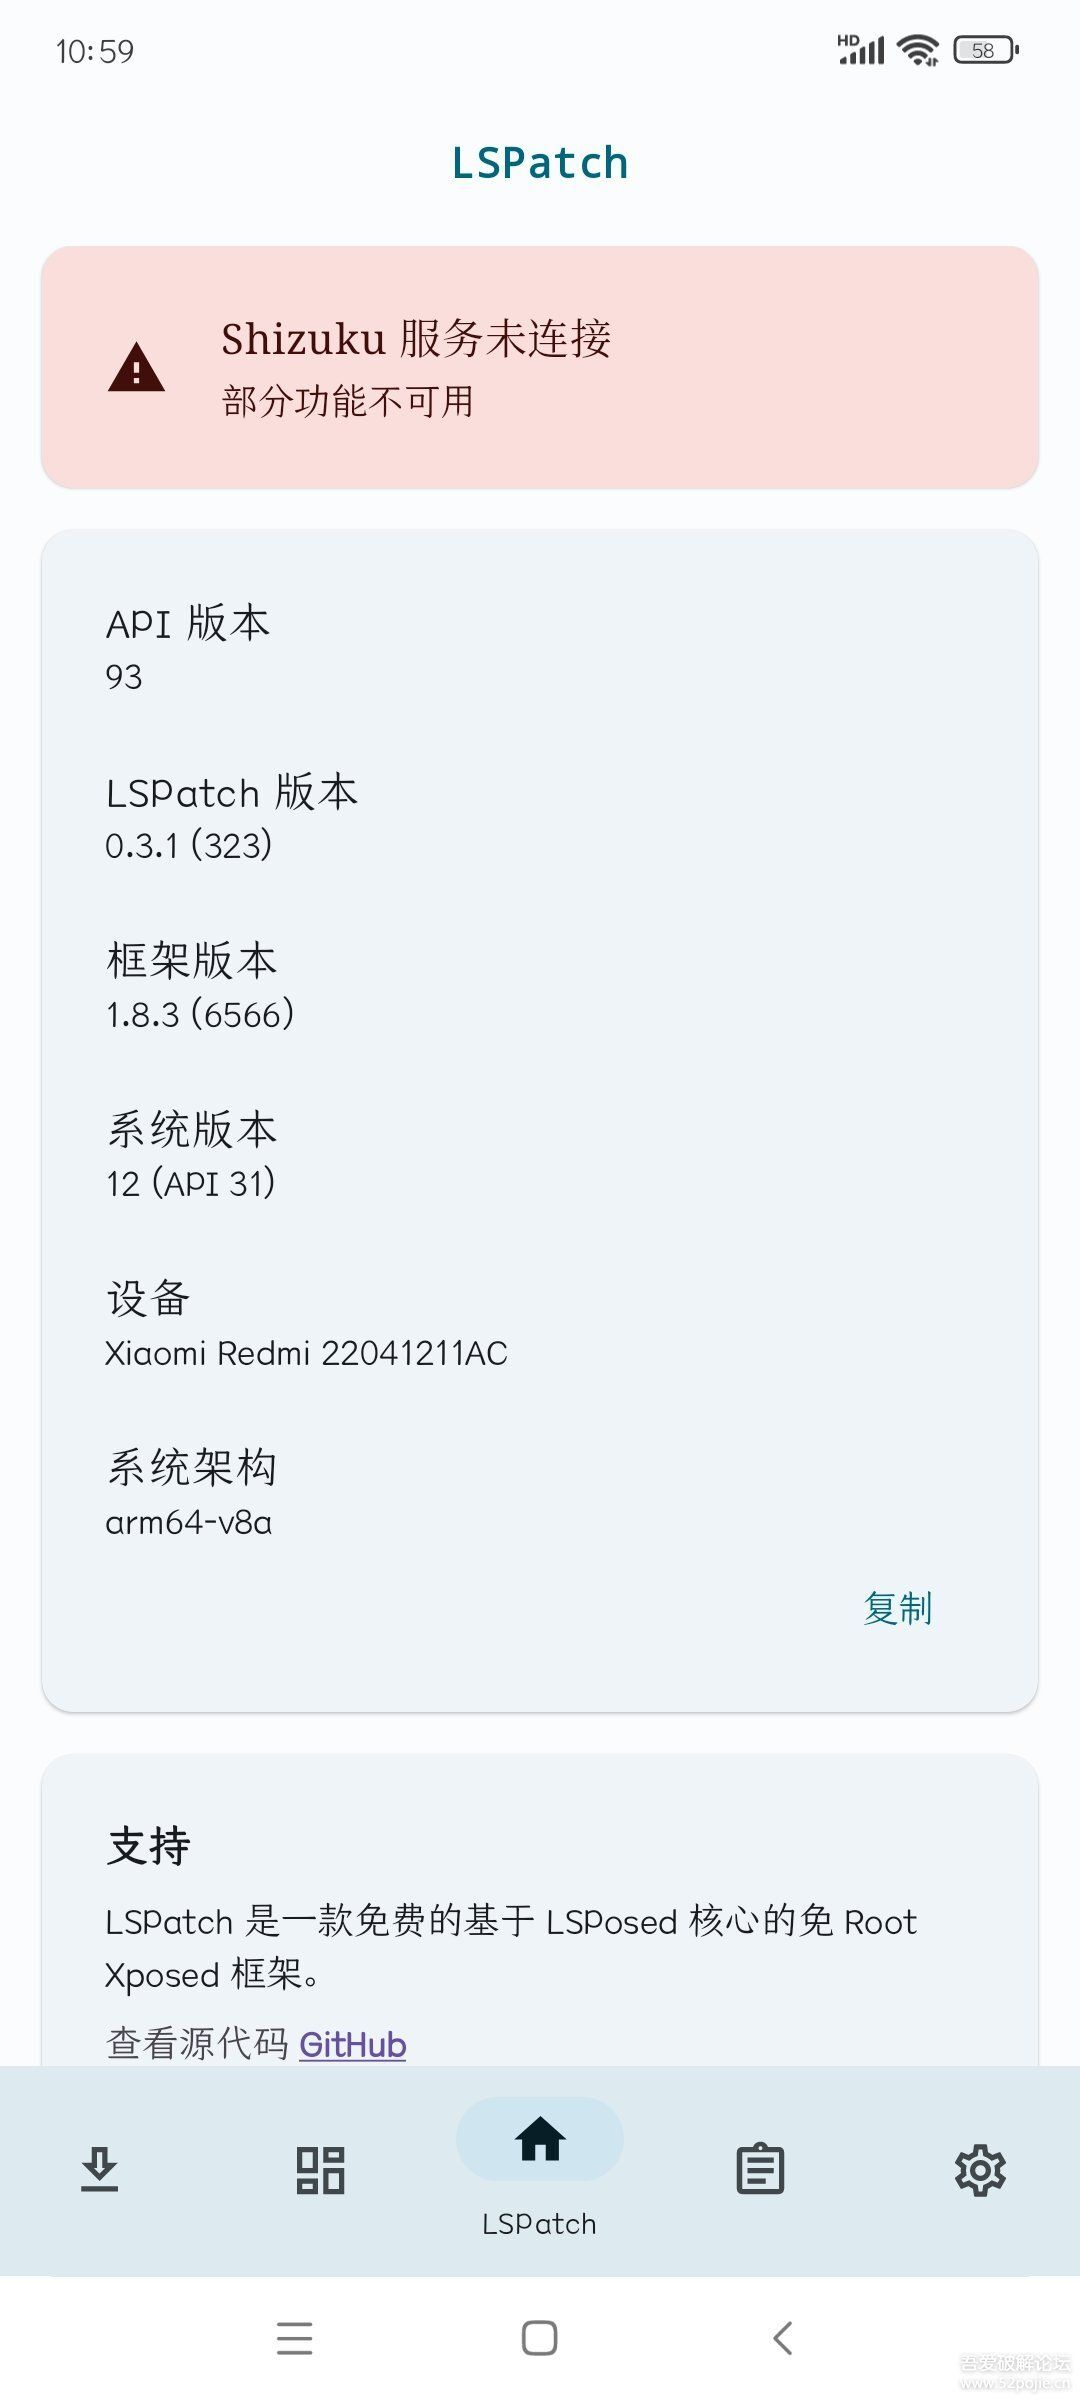 LSPatch v0.5.0(351) 植入免Root/Xposed模块